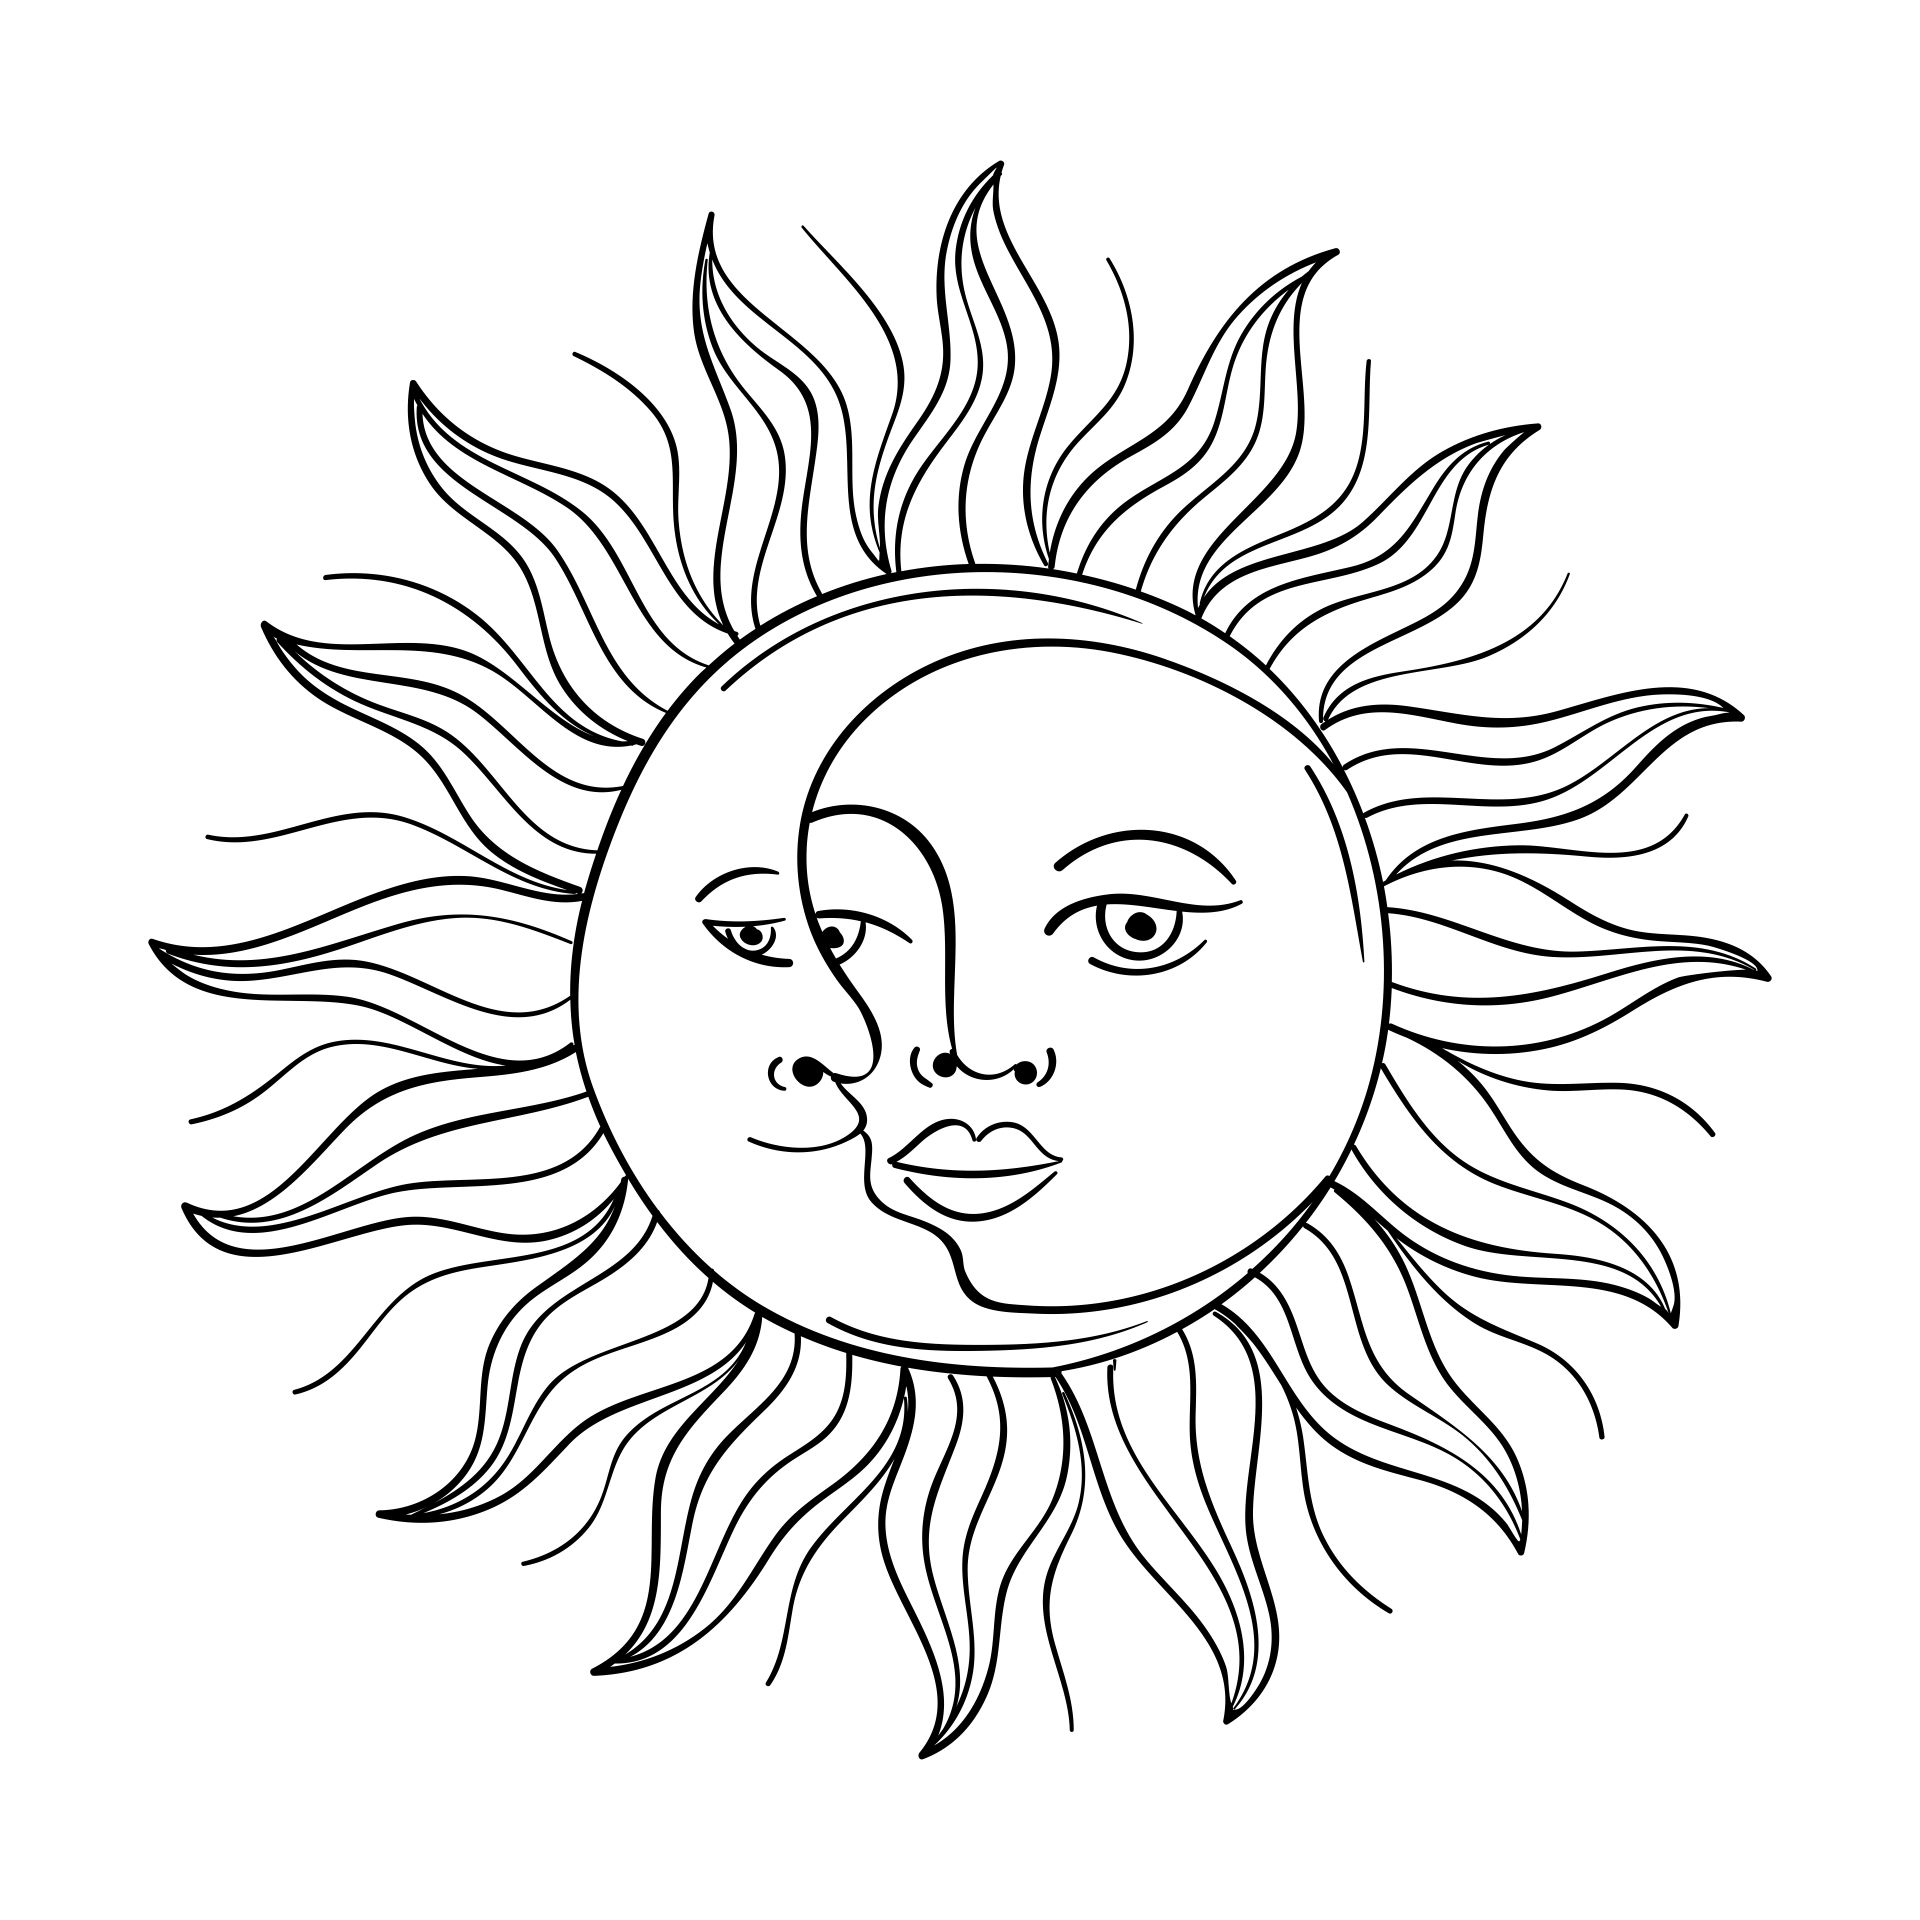 6 Best Images of Printable Sun And Moon Designs - Mandalas Coloring